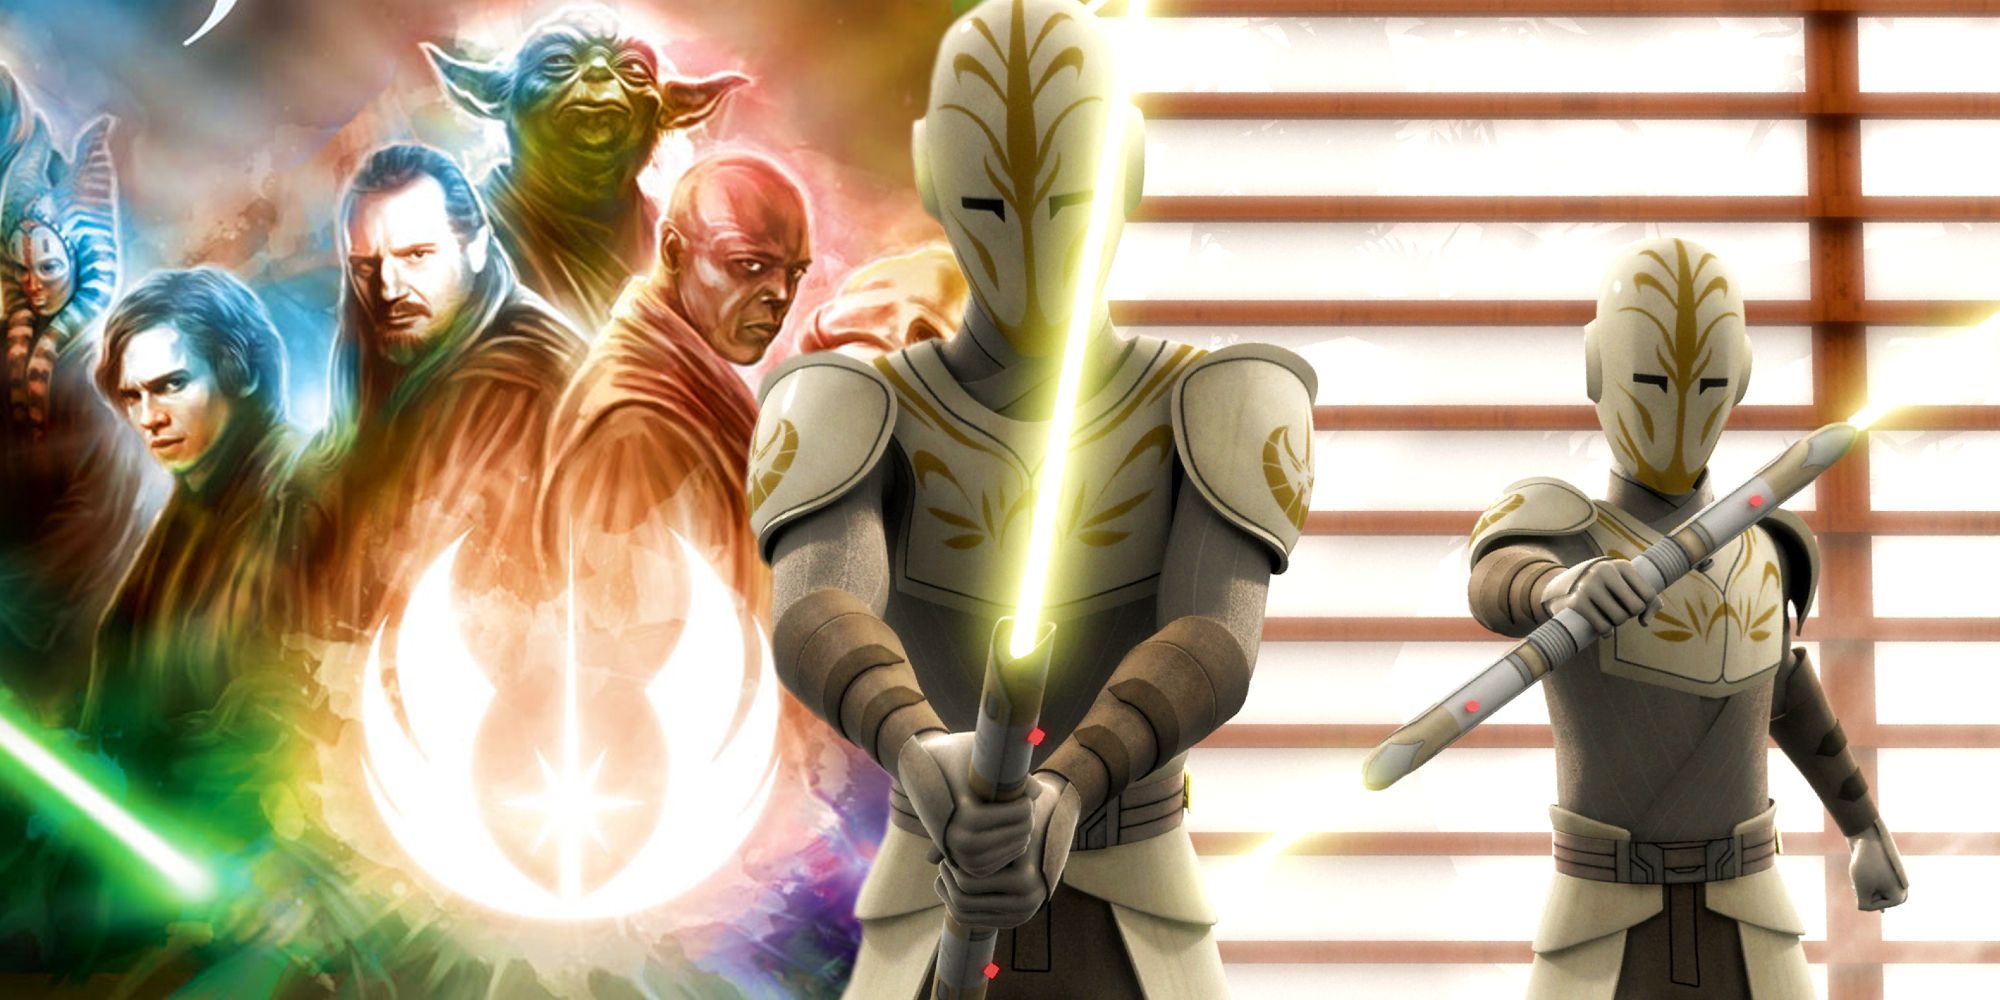 Jedi Temple Guards from Star Wars: Rebels next to artwork of the prequel Jedi Order